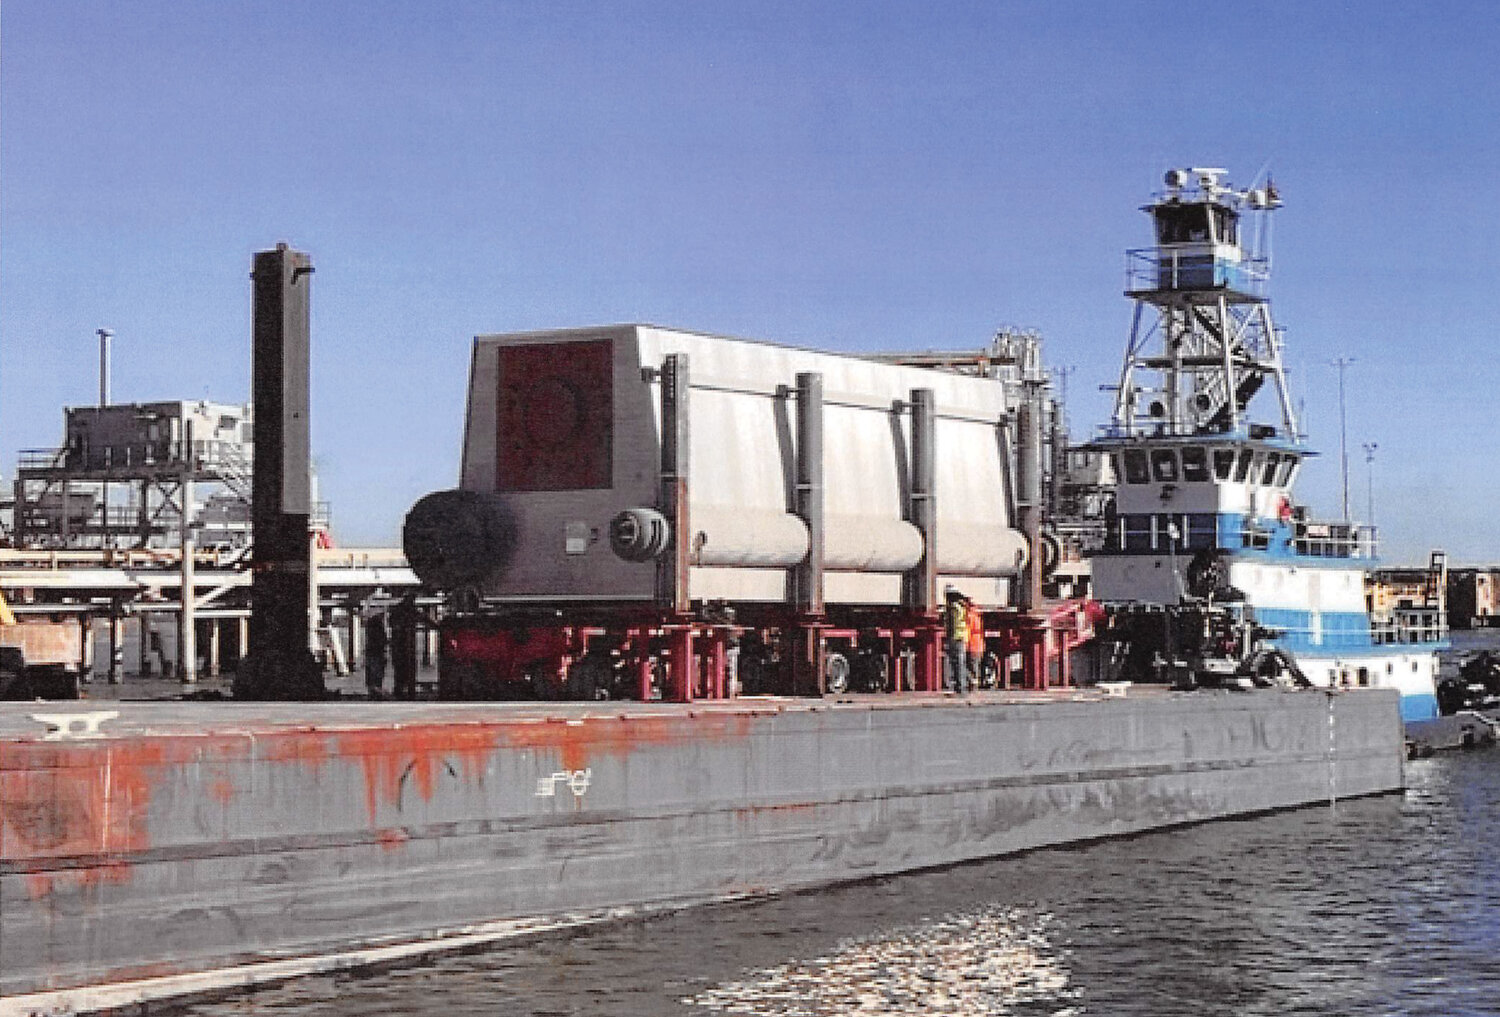 Barnhart Crane and Rigging plans to move a 220,000-pound boiler from Texas to the Florida Crystals Plant in South Bay. They provided this photo of a similar boiler they moved by barge last year.